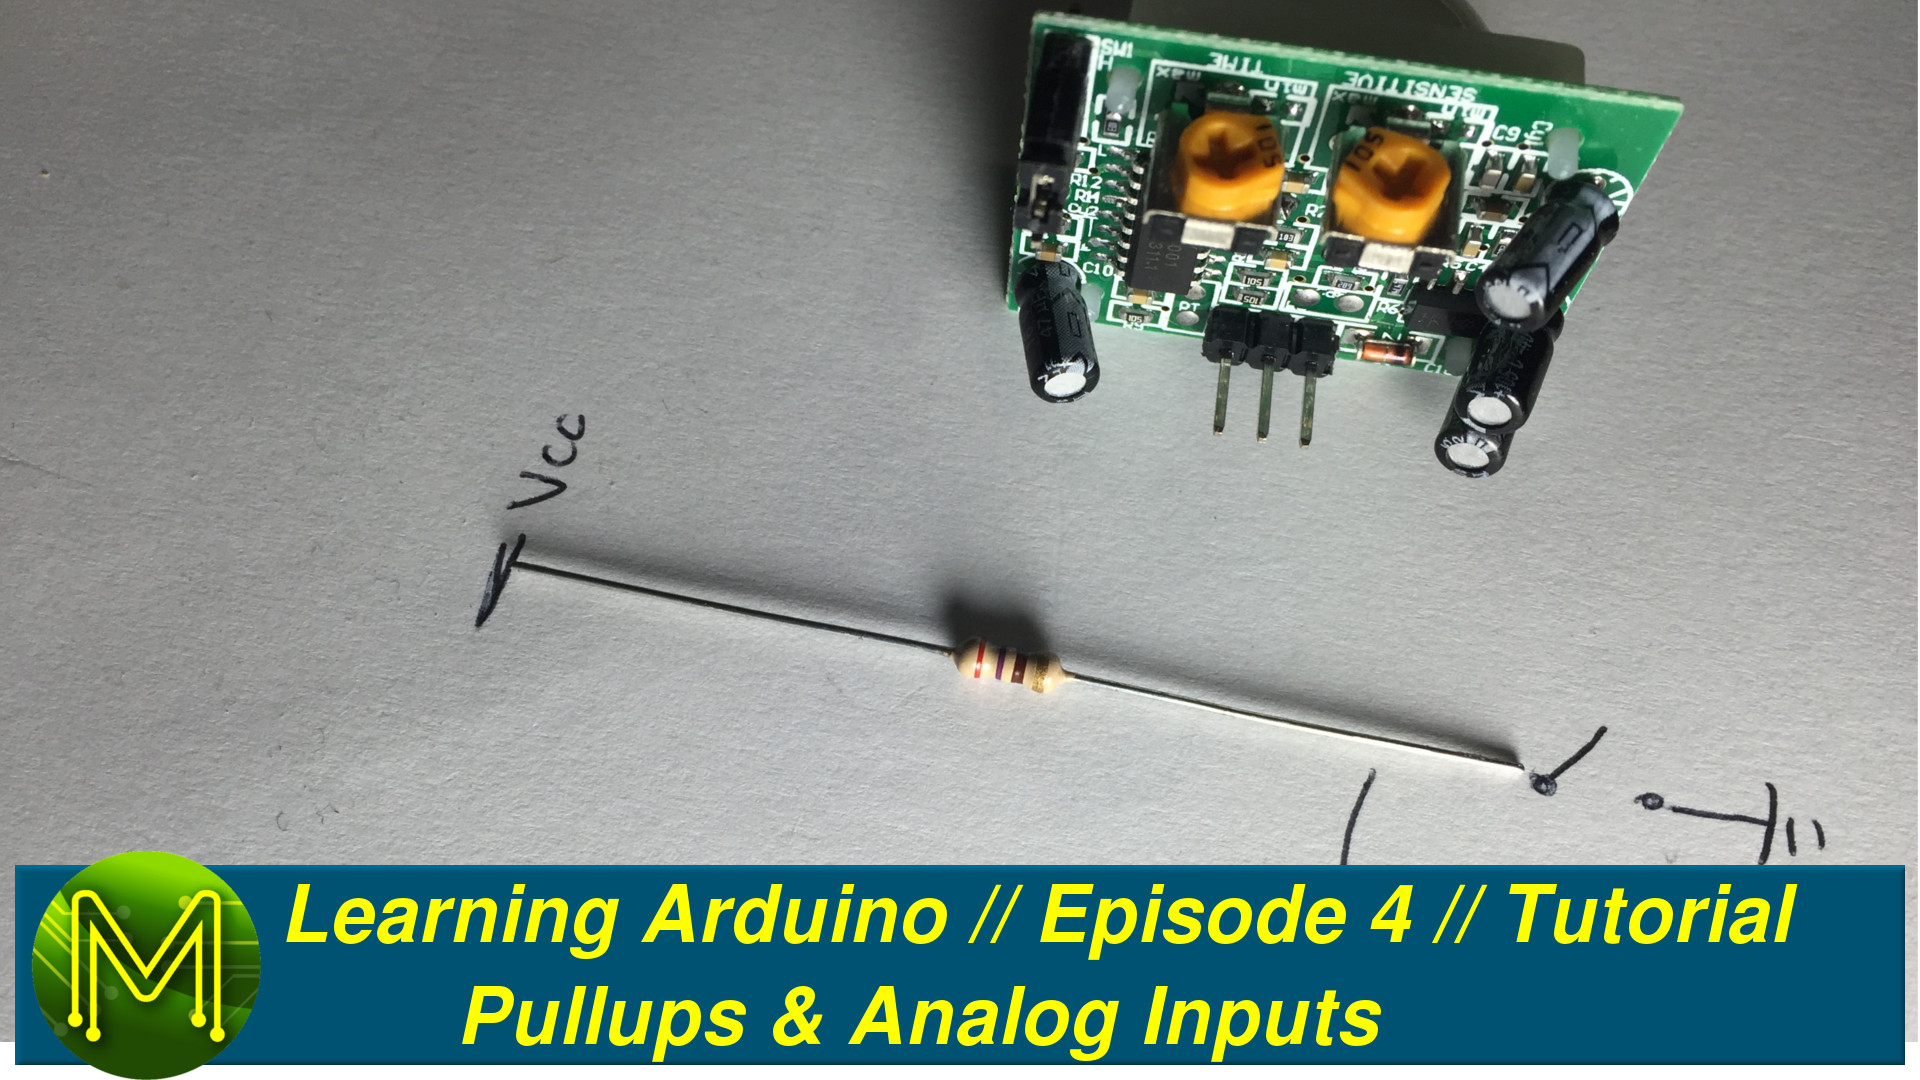 Learning Arduino: Pullups and Analog Inputs // Episode 4 // Tutorial